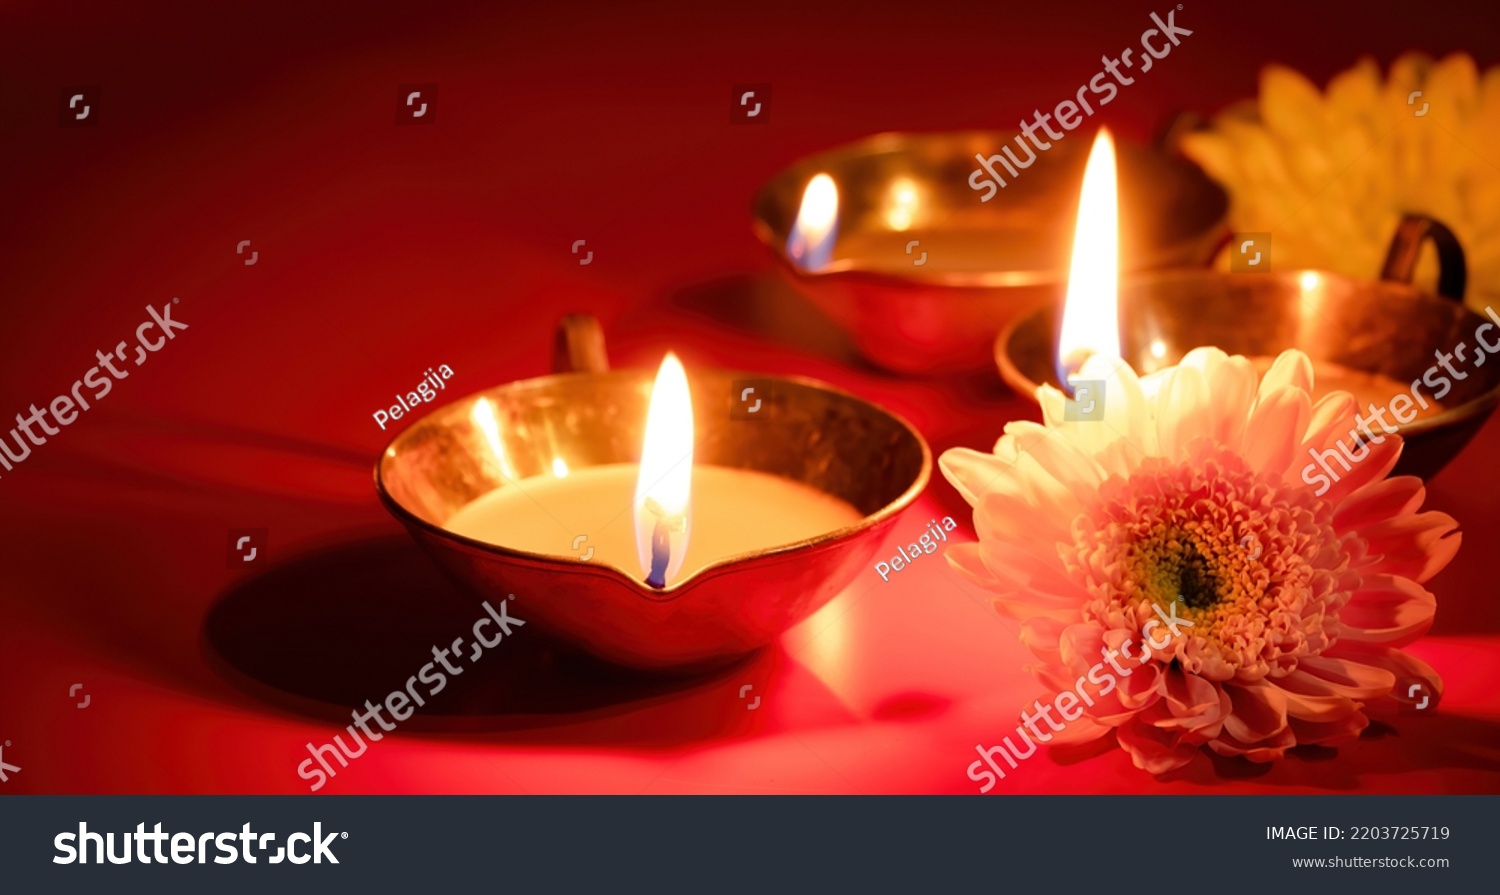 Happy Diwali. Diya oil lamp and flowers on red background. Traditional Hindu celebration. Religious holiday of light. Copy space, banner format. #2203725719